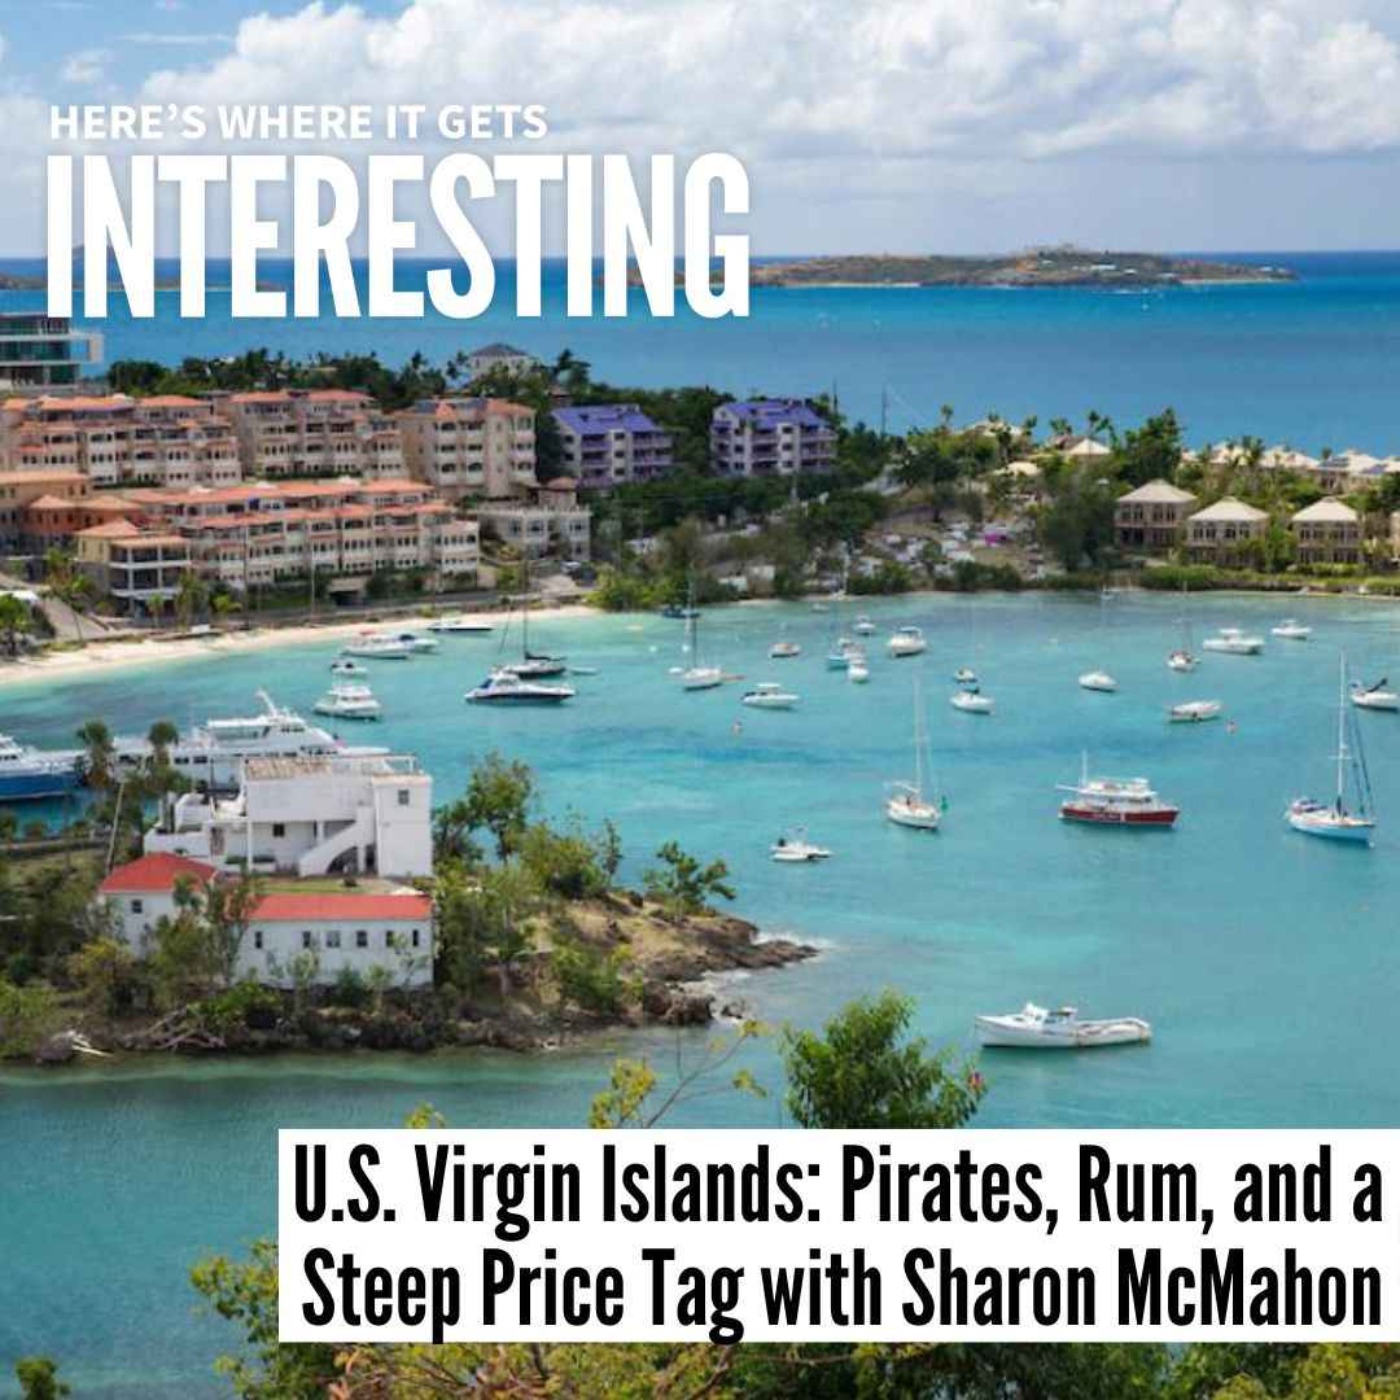 U.S. Virgin Islands: Pirates, Rum, and a Steep Price Tag with Sharon McMahon